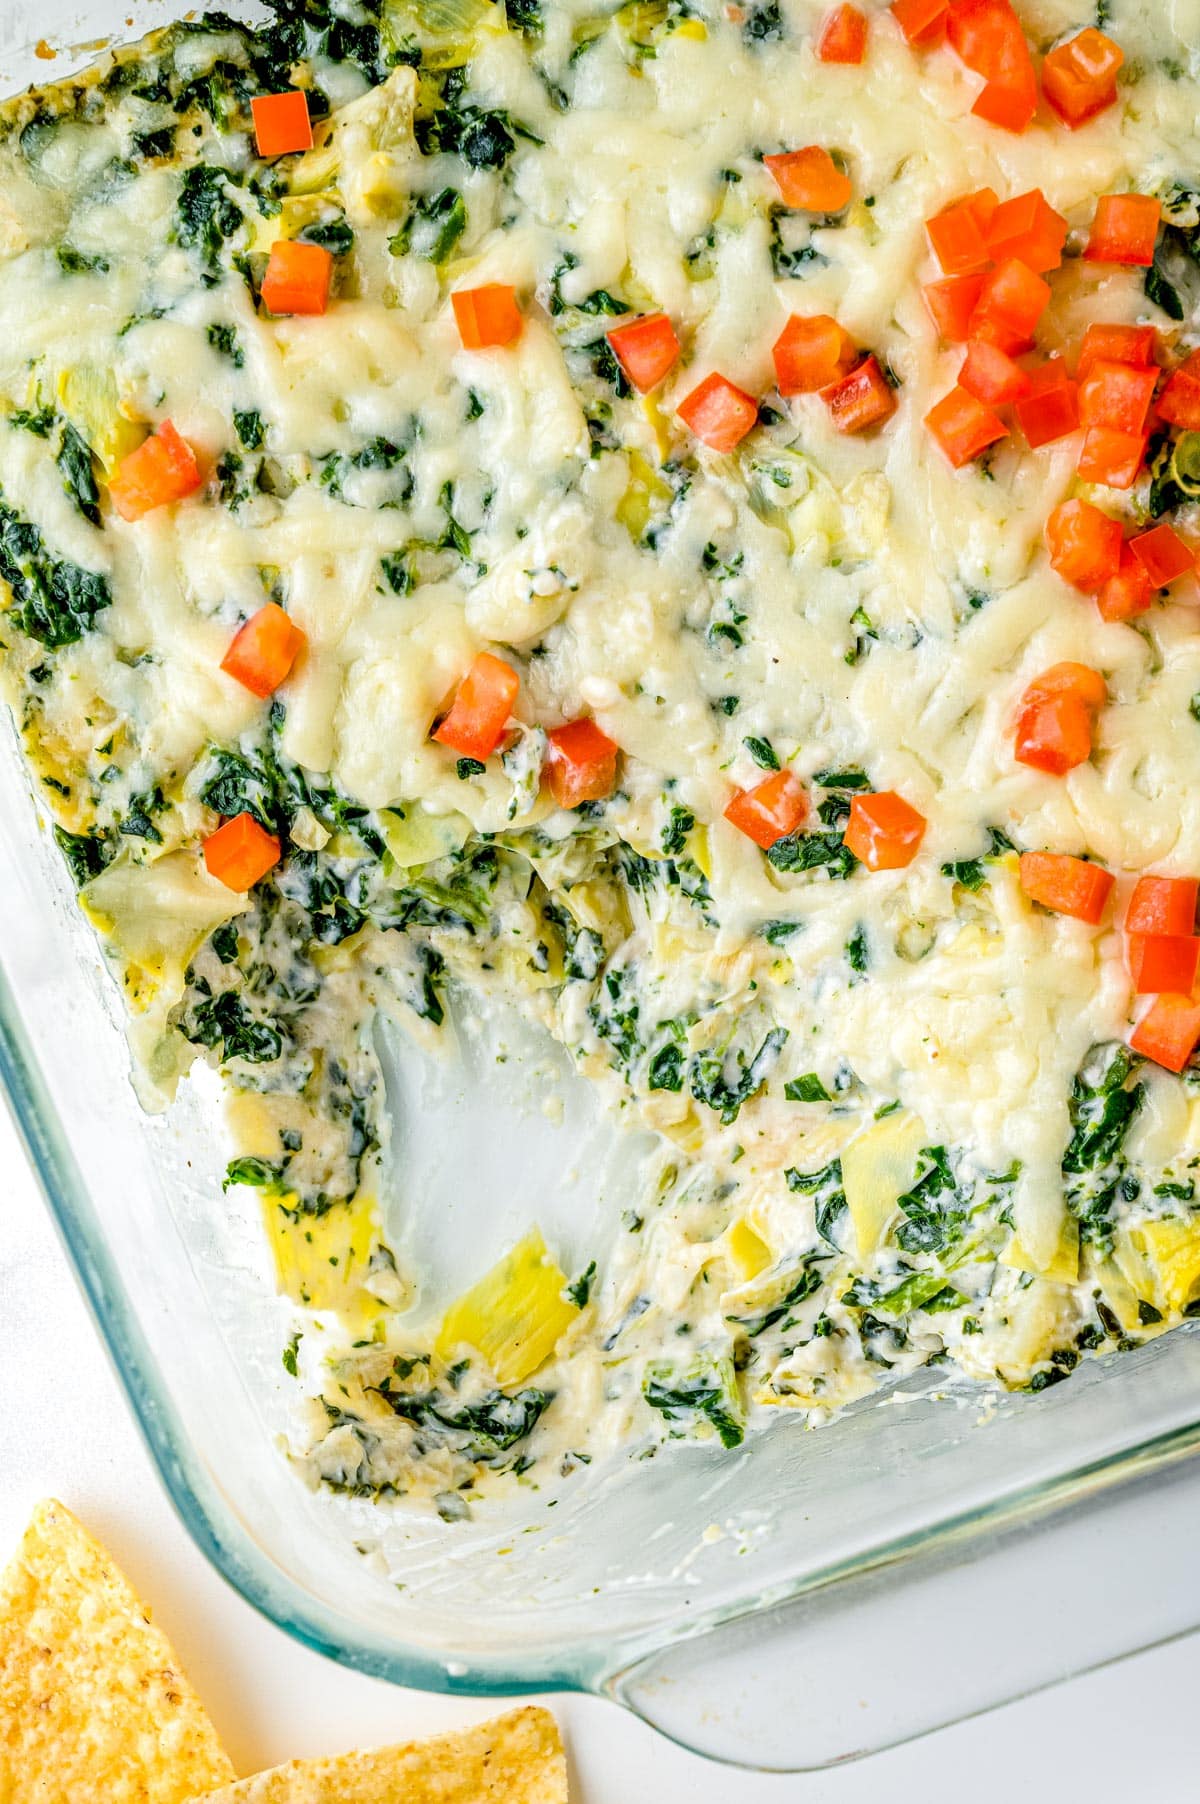 The finished Spinach and Artichoke Dip in a casserole dish.